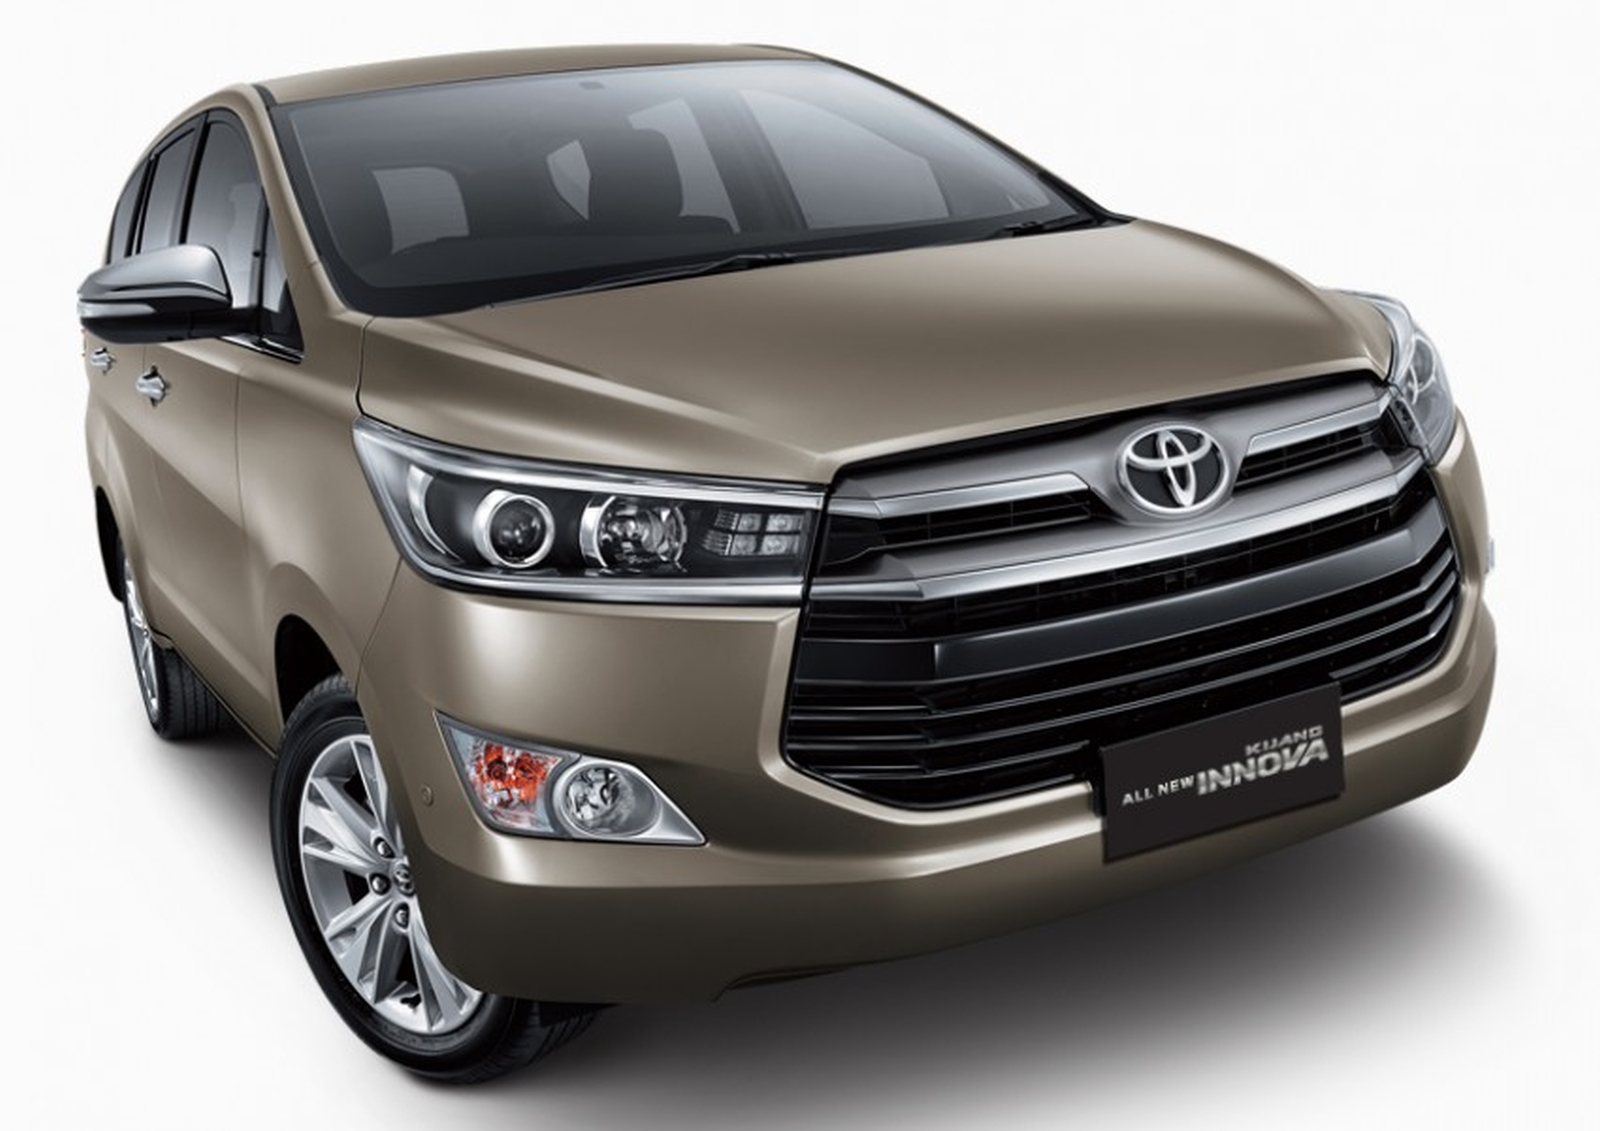  2021  Toyota Innova  officially revealed Images details 